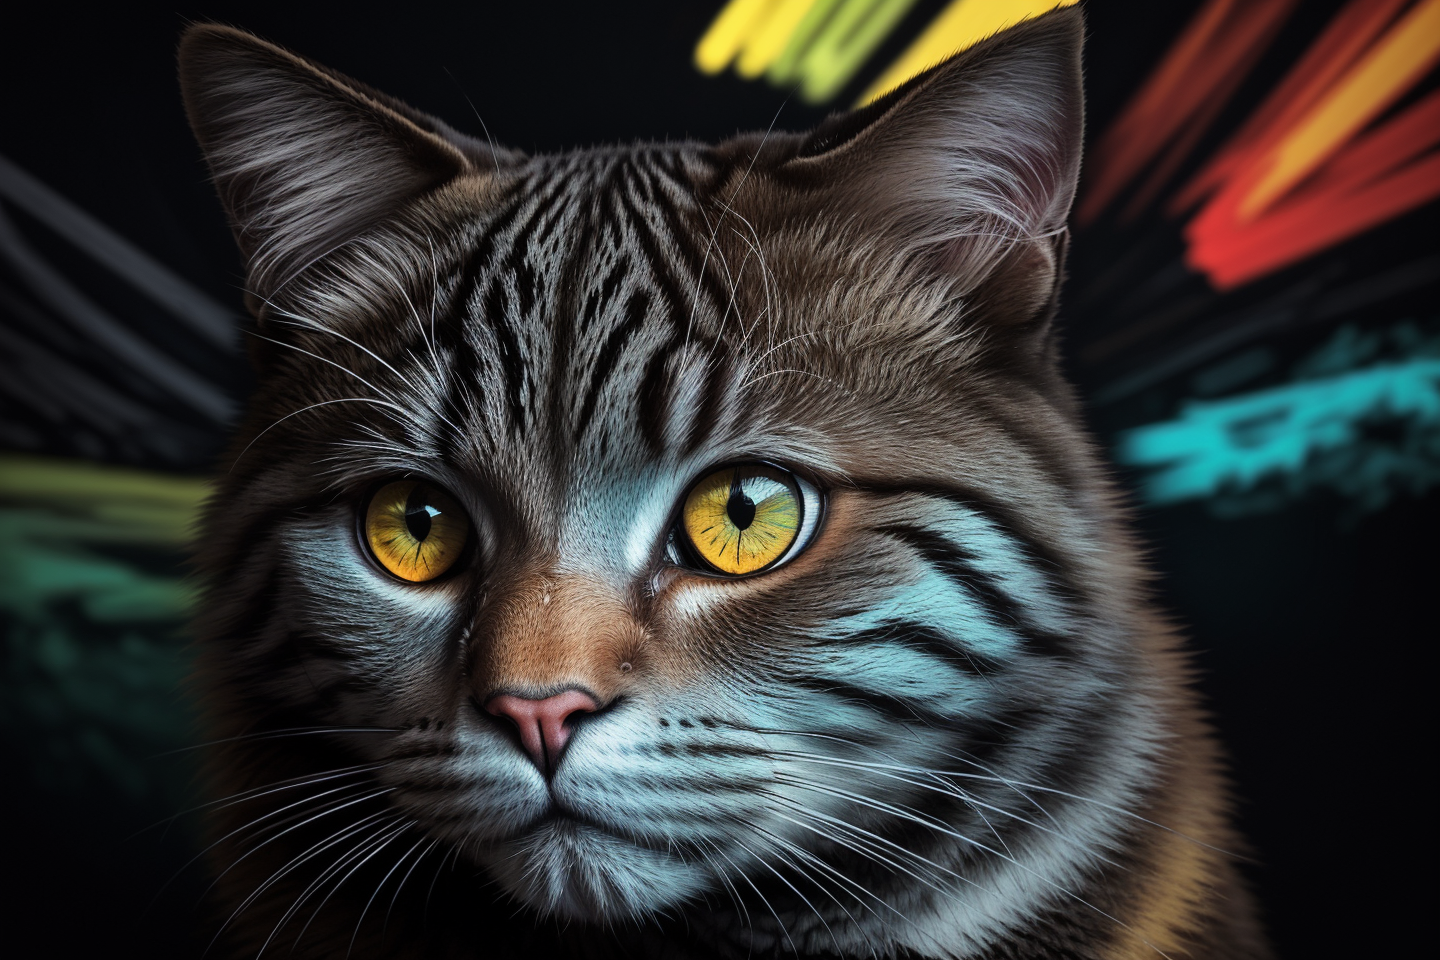 technicolor, vibrant, Chemical Cat, radioactive glow, Biohazard, abstract art by Petros Afshar, oversaturated